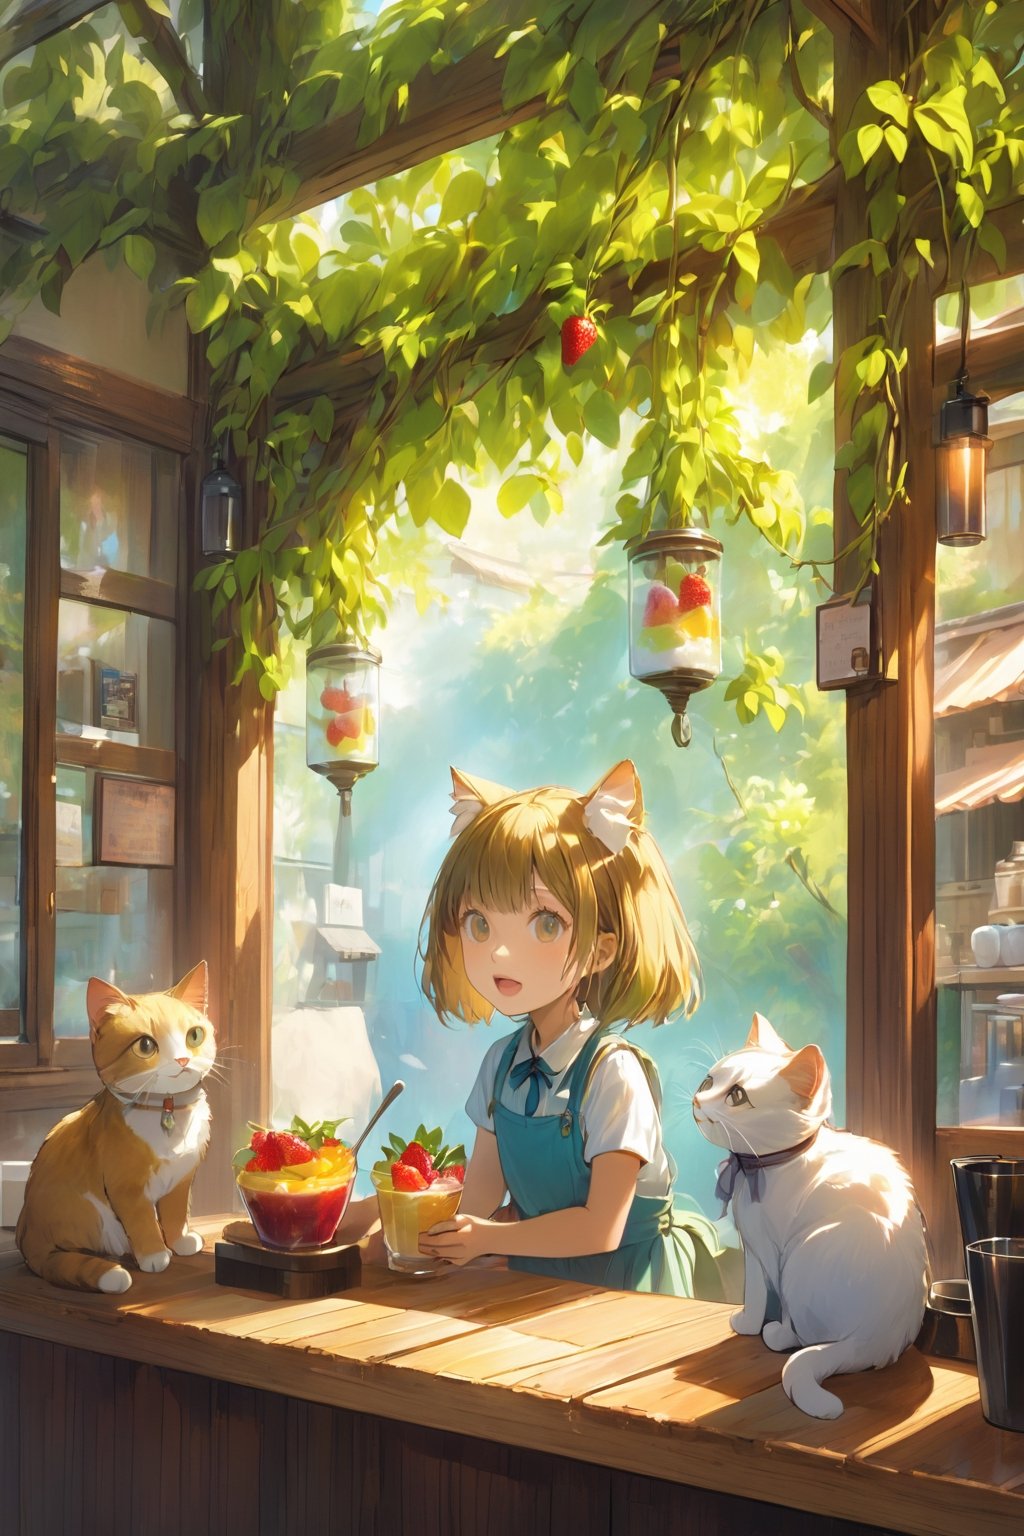 A cute girl is eating ice cream in a cat cafe. The coffee shop is decorated with decorations, and there are piles of fruits on the bar, which look delicious and tempting. Art glass container. A quiet cat cafe facing a beautiful garden.

As the warmth of the summer sun beat down, 10-year-old Sakura was thrilled for her weekly treat - an afternoon out with Obaa-chan at the quaint little cafe nestled amongst the blossom trees. The rustic wooden walls were covered in flowering vines, their sweet scent wafting on the breeze. Colorful hangings and artwork filled any spaces not overflowing with blooms.

It was here that Obaa-chan always treated Sakura to the cafe's specialty - a towering glass of their 'Rainbow Reviver' frappe. Vibrant flavors of berries, mangoes and coconut were artistically layered in spirals, sure to lift any mood. Today, Sakura had also chosen a fresh fruit sundae, piled high with peaches, strawberries and kiwi atop creamy vanilla.

As always, the first bite was heavenly. Sweet juices burst across her tongue as soft fruits melted in her mouth. Laughter and chatter drifted out from the open windows, mingling with birdsong in the branches above. All around, other patrons enjoyed treats as deliciously. Behind the counter, the baristas worked diligently to create more masterpieces.

